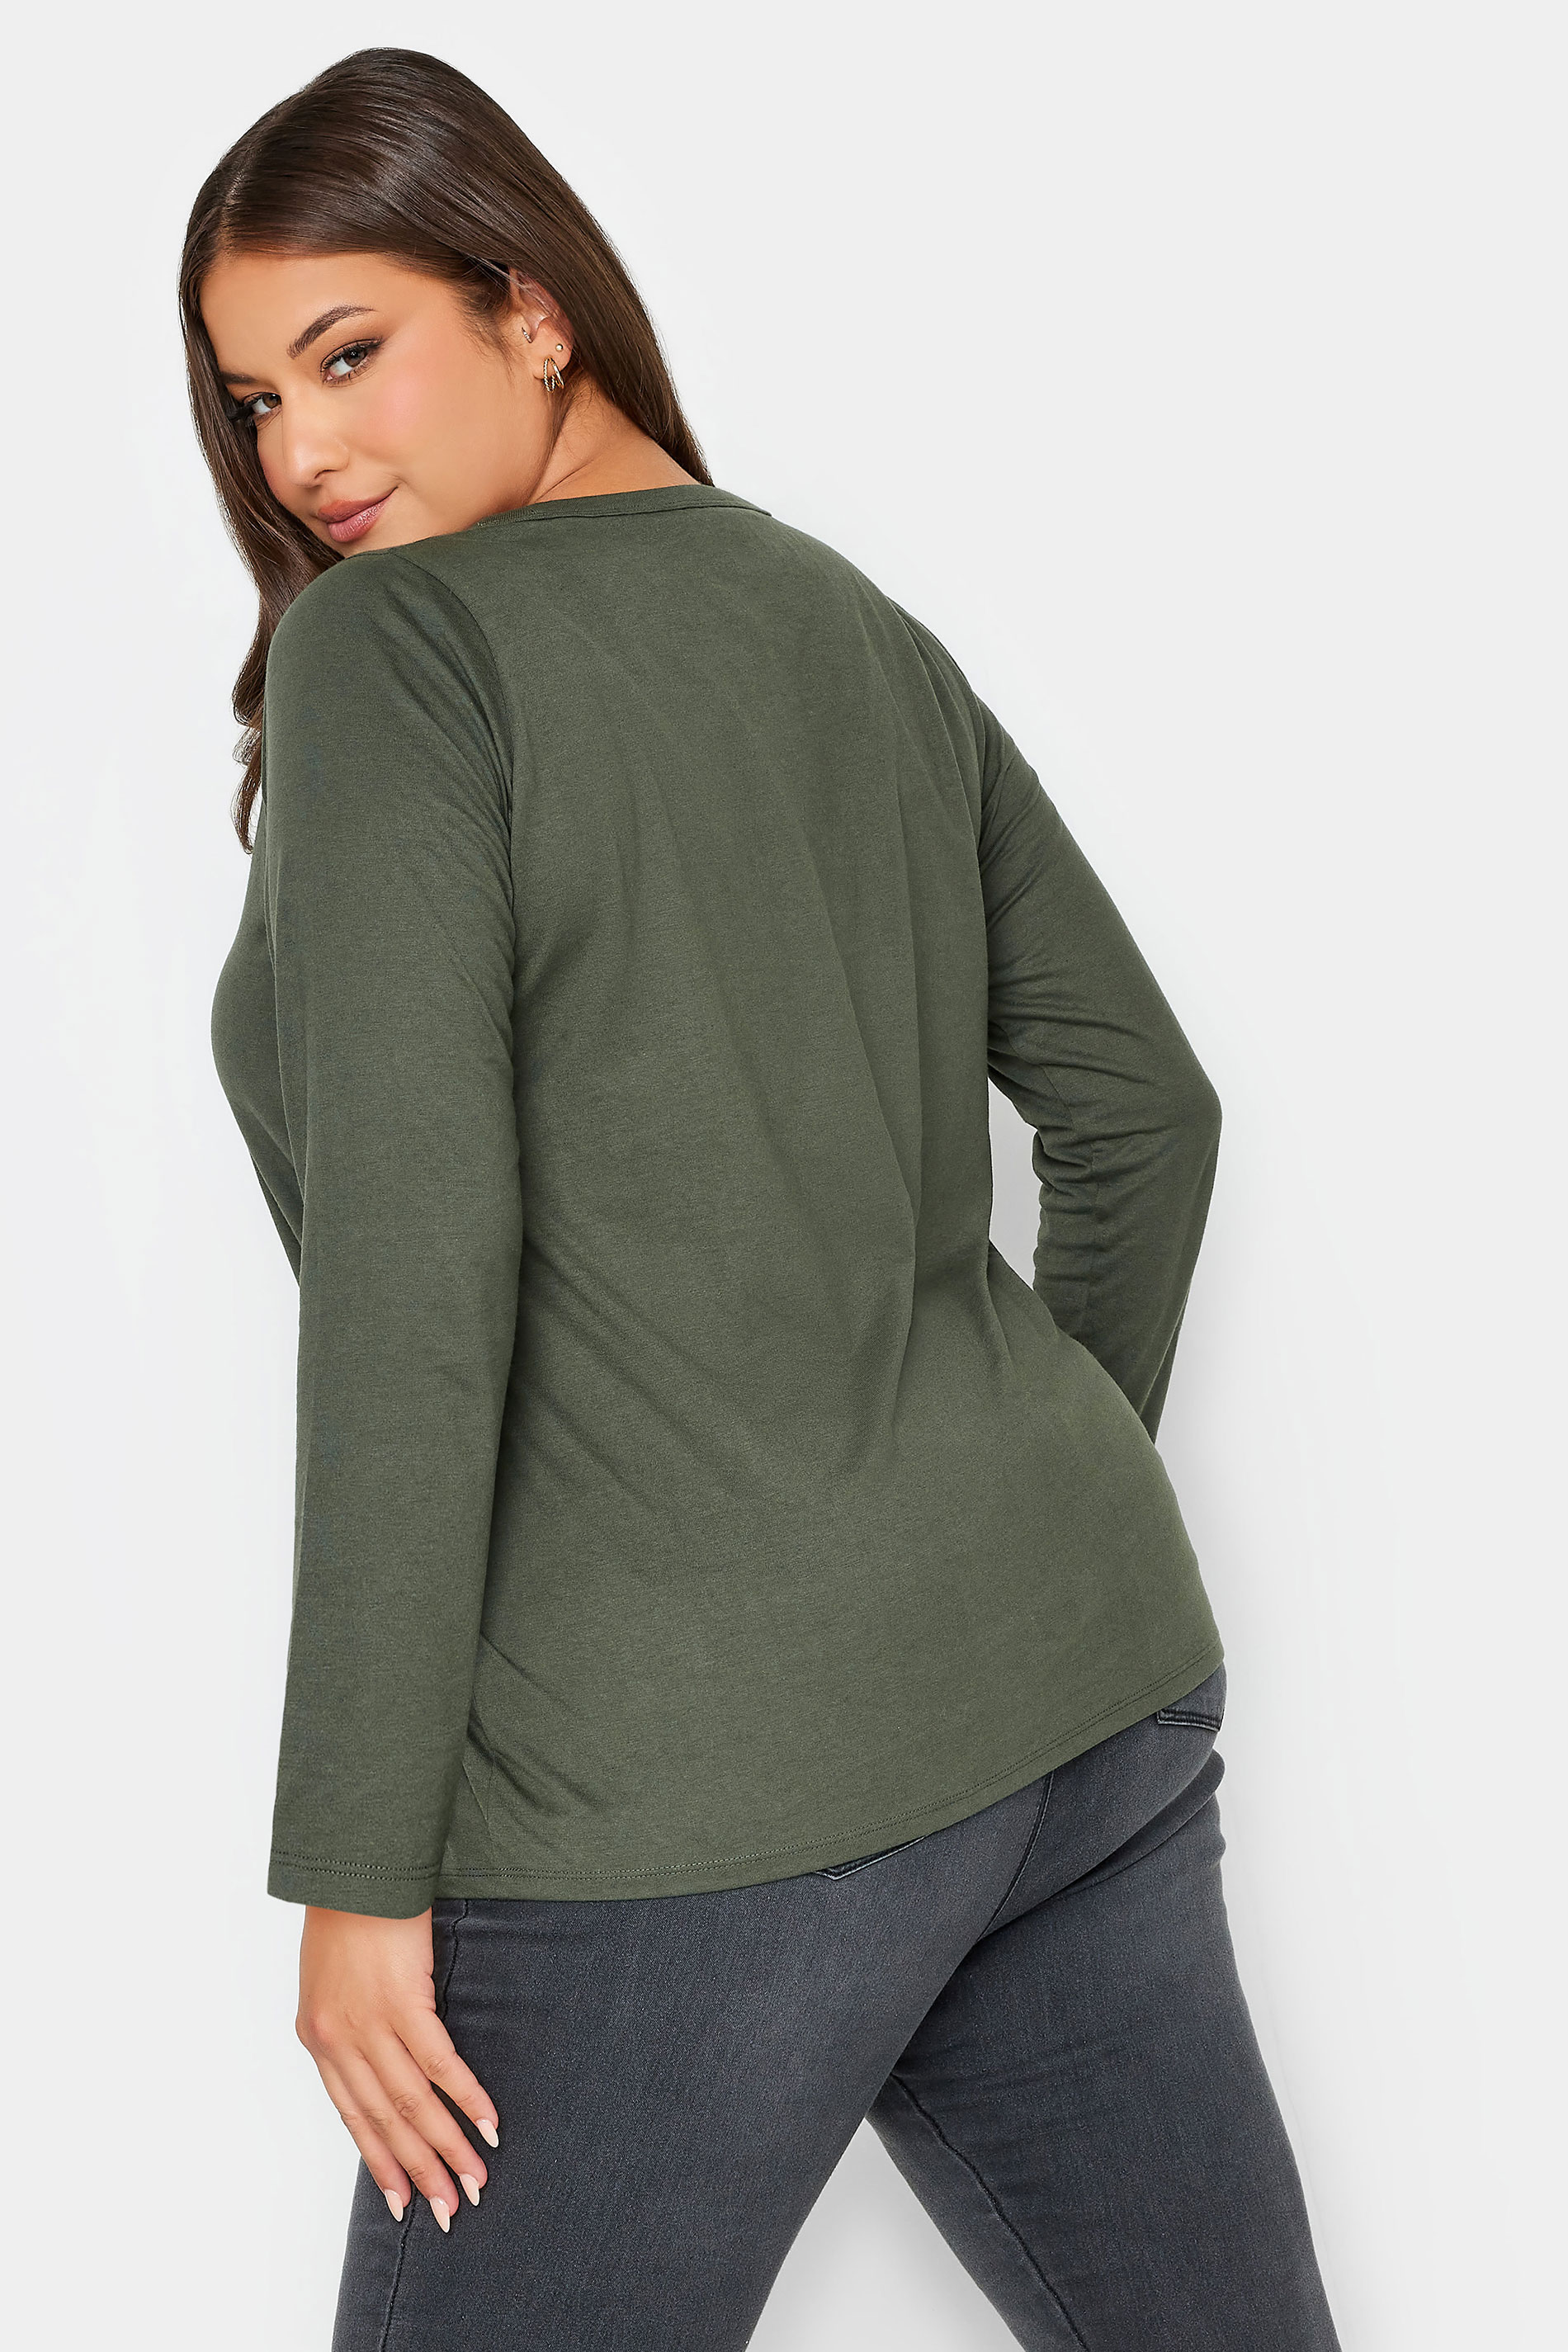 YOURS Curve Plus Size Khaki Green Long Sleeve Essential T-Shirt | Yours Clothing  3